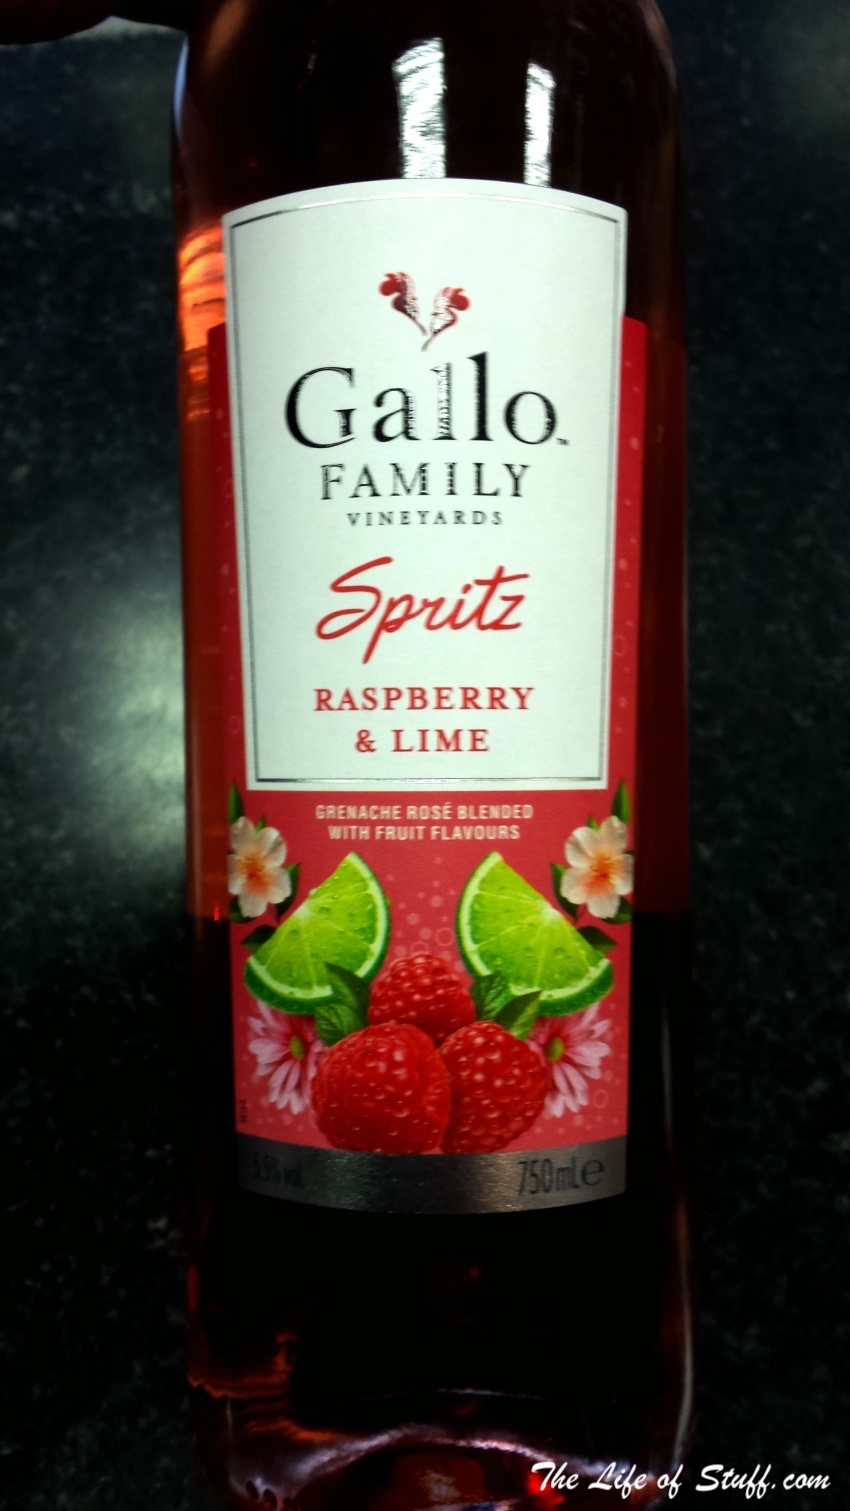 Bevvy of the Week - Gallo Family Vineyards, Spritz Raspberry & Lime - 1